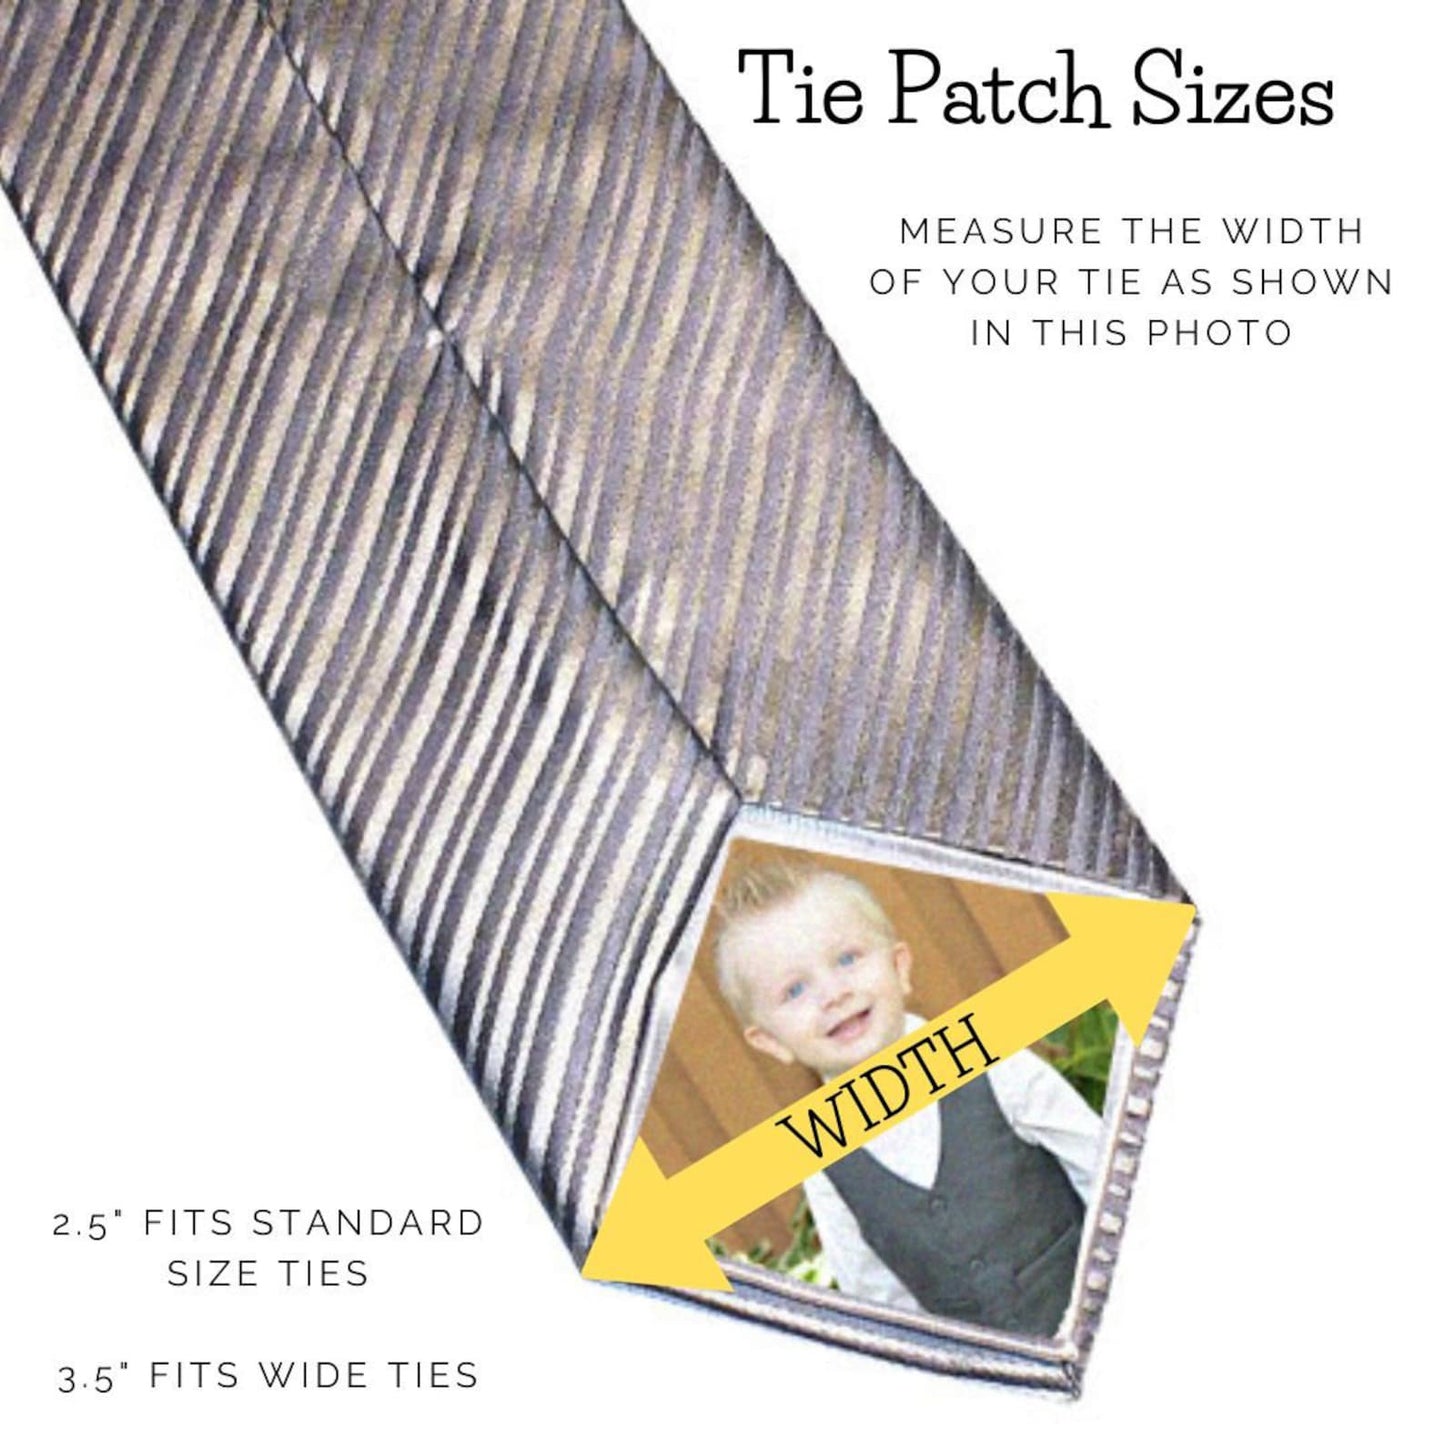 Measurement-guide-for-custom-photo-tie-patch-sizes-on-a-striped-tie.